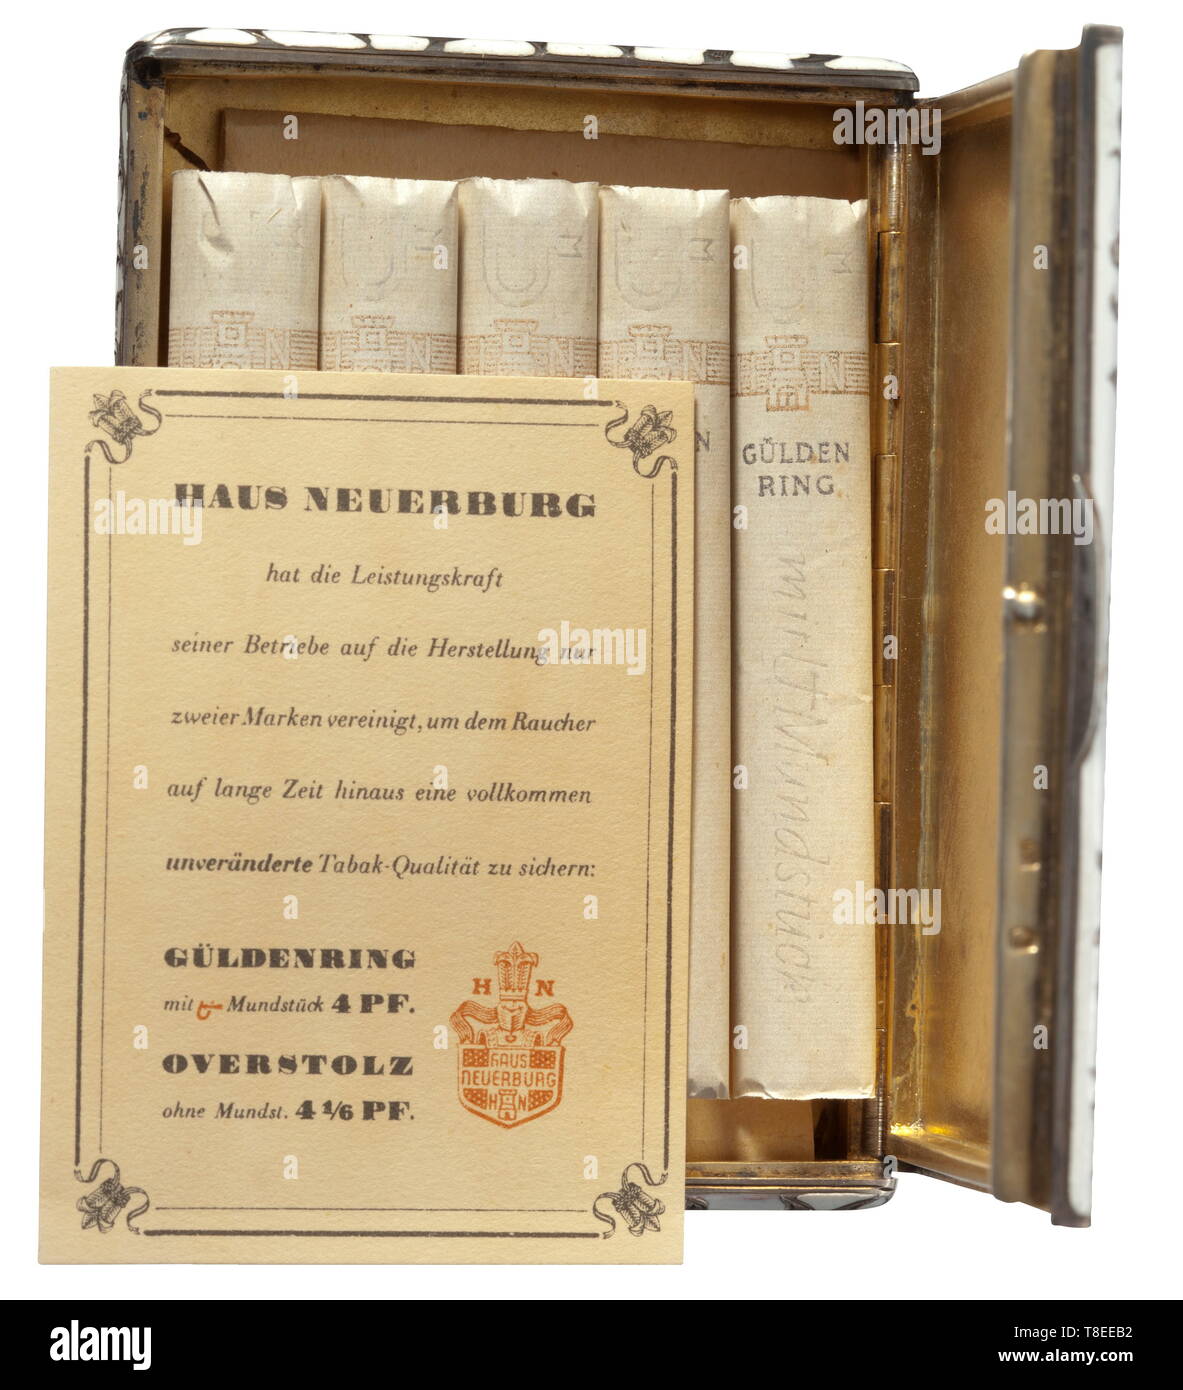 Eva Braun (1912 - 1945) - a silver enamelled cigarette case Silver, white enamelled case with engraved floral design, gilt interior, mark of fineness '935' and imperial crown. 60 x 85 mm, 148 g. Inside: five Güldenring cigarettes by Haus Neuerburg. Provenance: Ilse Fucke-Michels, Eva Braun's sister. According to her written confirmation (enclosed in copy), the case and a corresponding (no longer existent) silver cigarette holder were gifts from her employer, the photographer Heinrich Hoffmann. historic, historical, 20th century, 1930s, NS, National Socialism, Nazism, Third , Editorial-Use-Only Stock Photo